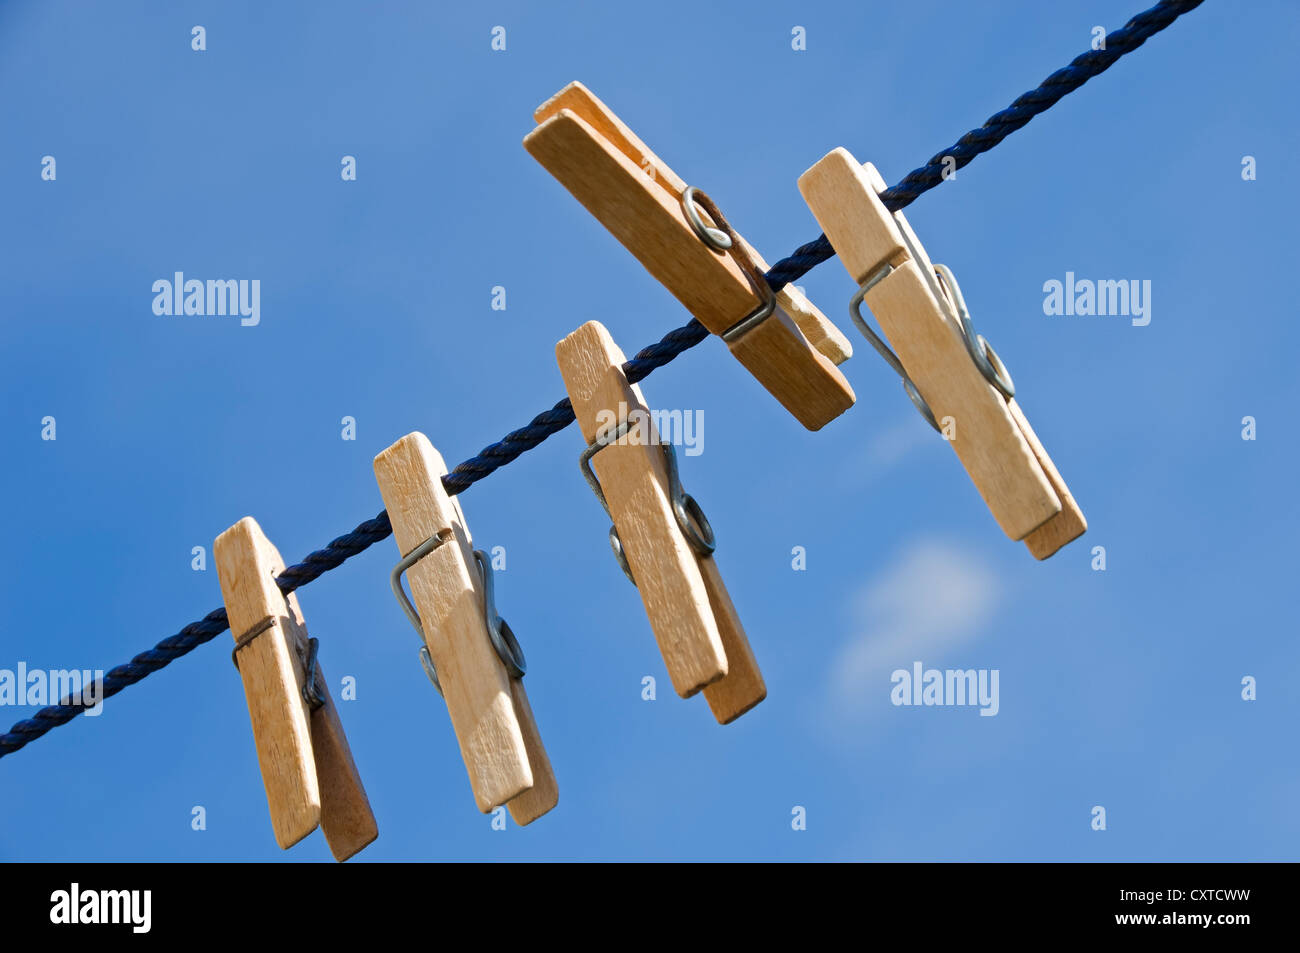 Close up of wooden clothes pegs peg on washing line with blue sky background England UK United Kingdom GB Great Britain Stock Photo